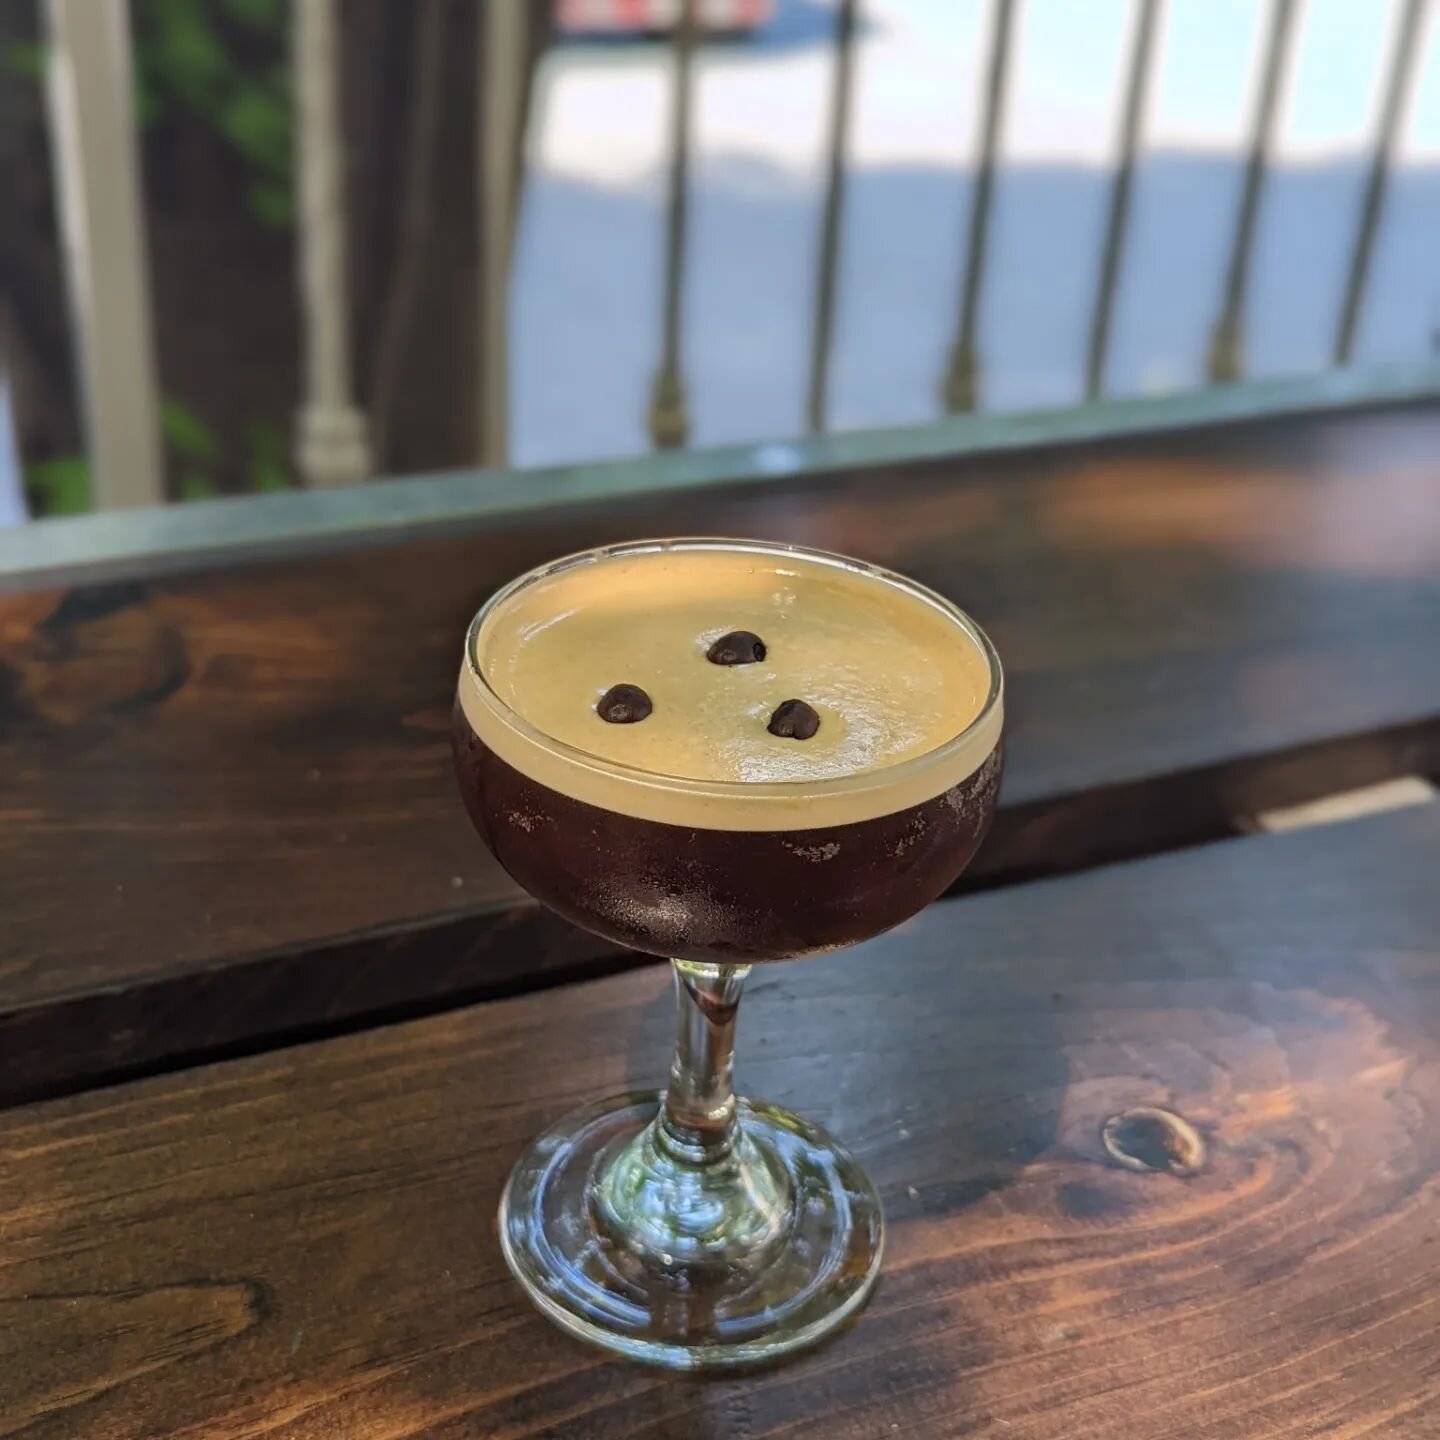 The Pony Espresso

1.75 oz. House Espresso Amaro
.75 oz. Kahluah
.25 oz. 2:1 Turbinado

Heavy shake and double strain and add 3 espresso beans

We also have our take on the Halekulani again this week. It's basically a bourbon tiki punch and it's a th